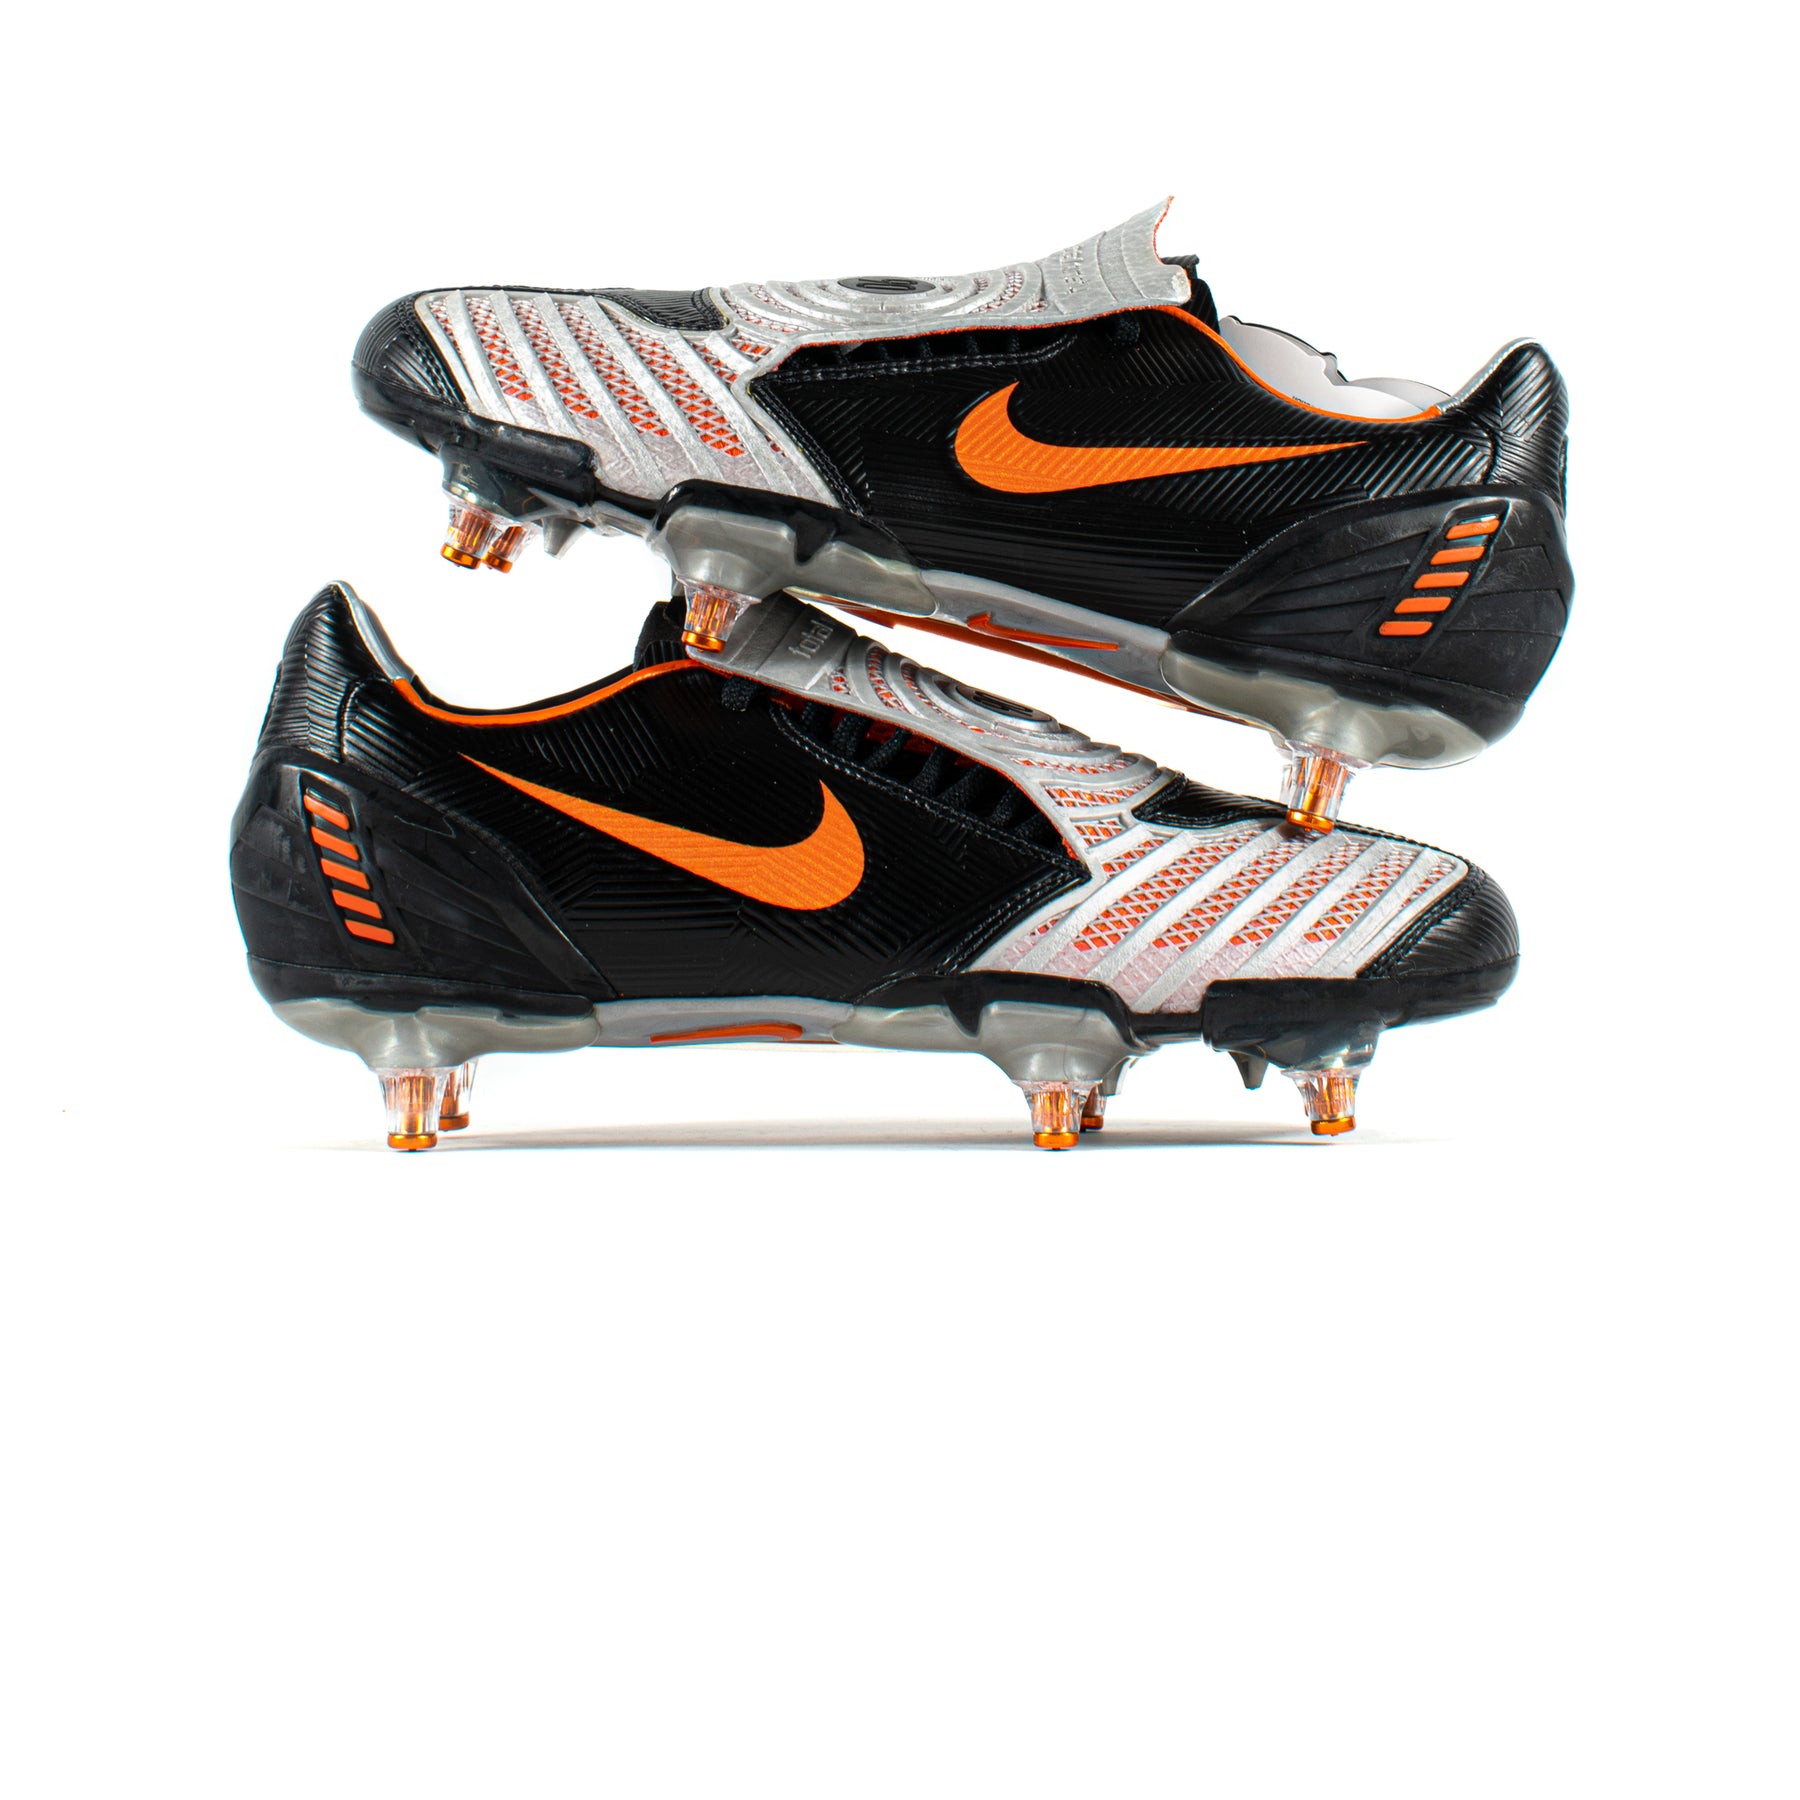 persona difícil litro Nike Total 90 T90 Laser II Black SG – Classic Soccer Cleats